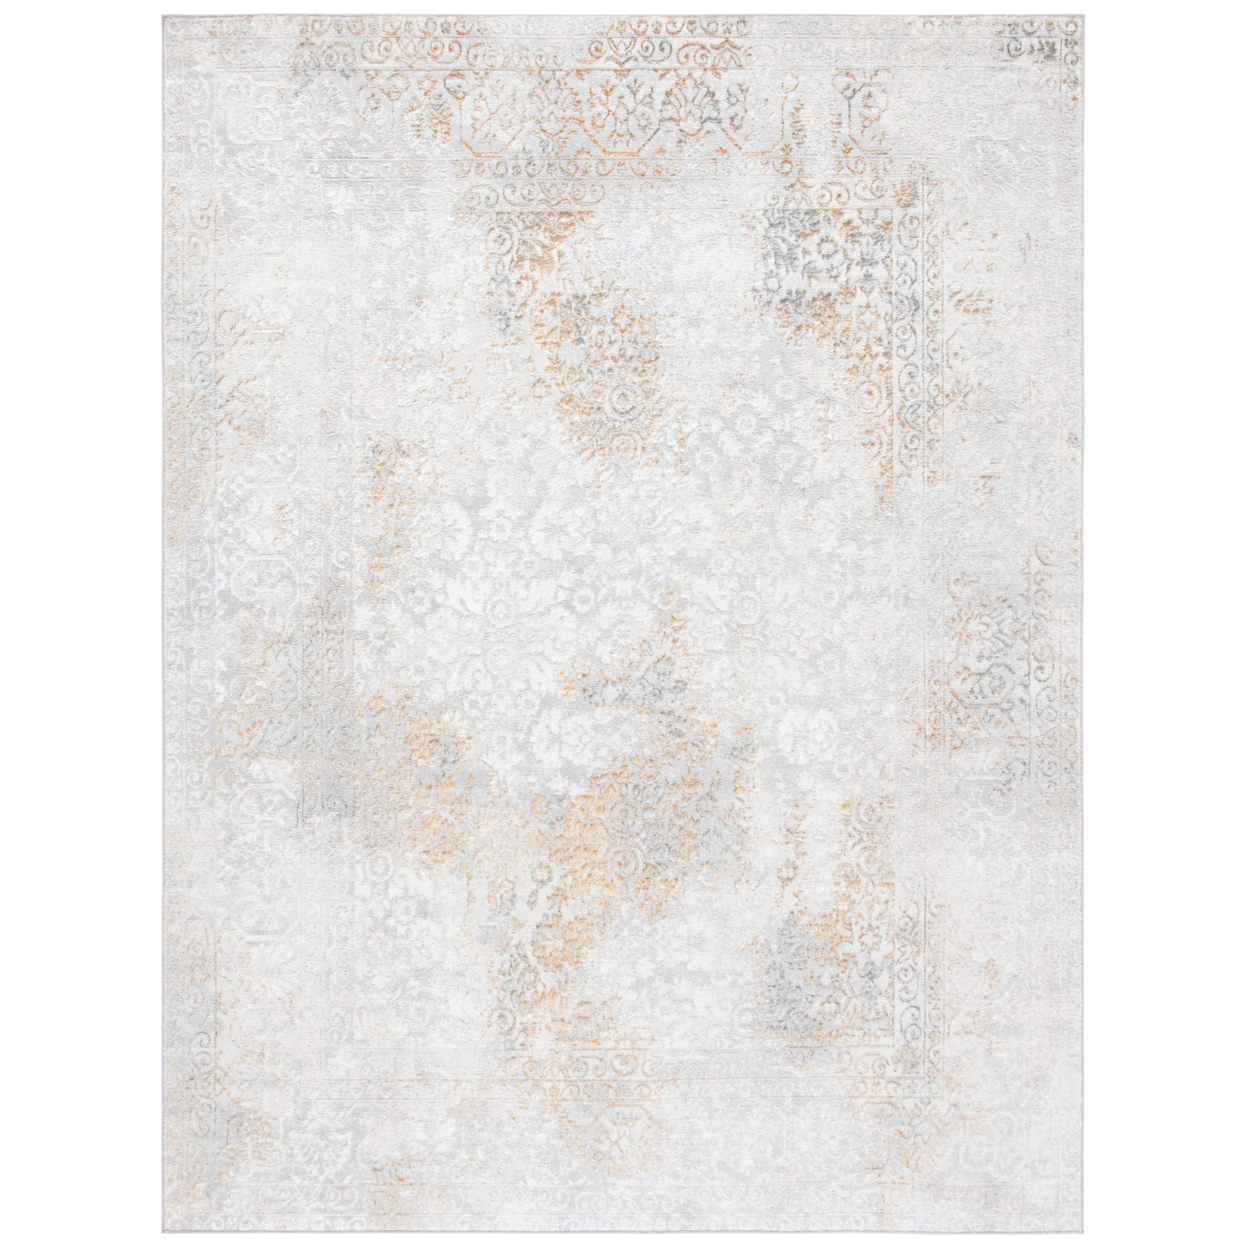 SAFAVIEH Orchard Collection ORC684G Grey / Gold Rug - 8 X 10